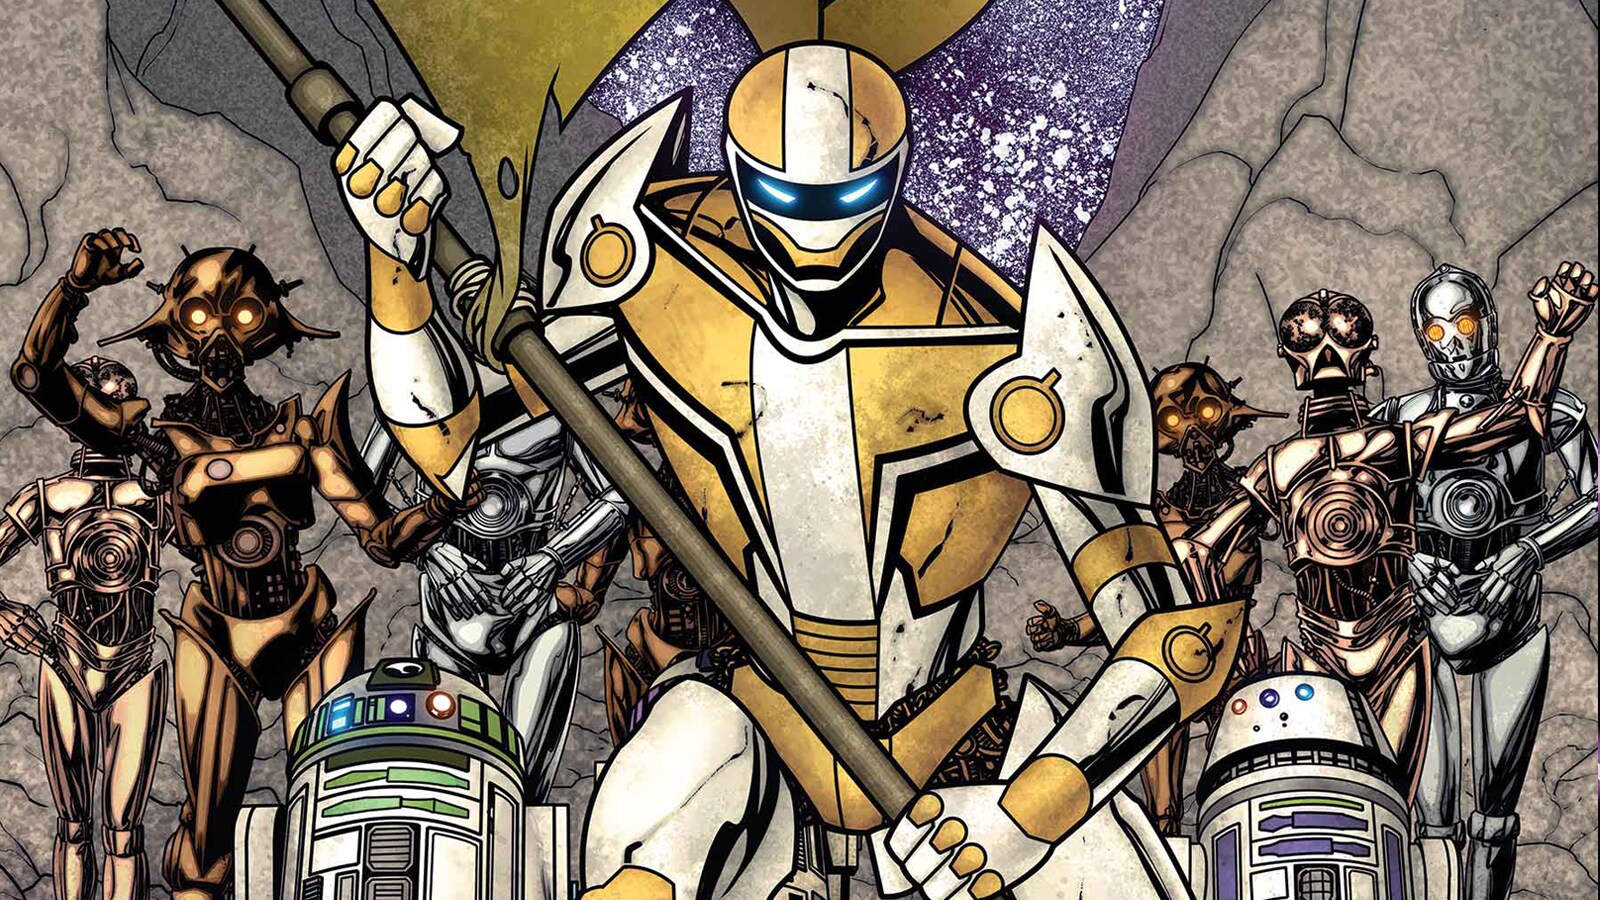 Uncover the Dark Droids Crossover Event in Marvel’s September 2023 Star Wars Comics – Exclusive Preview